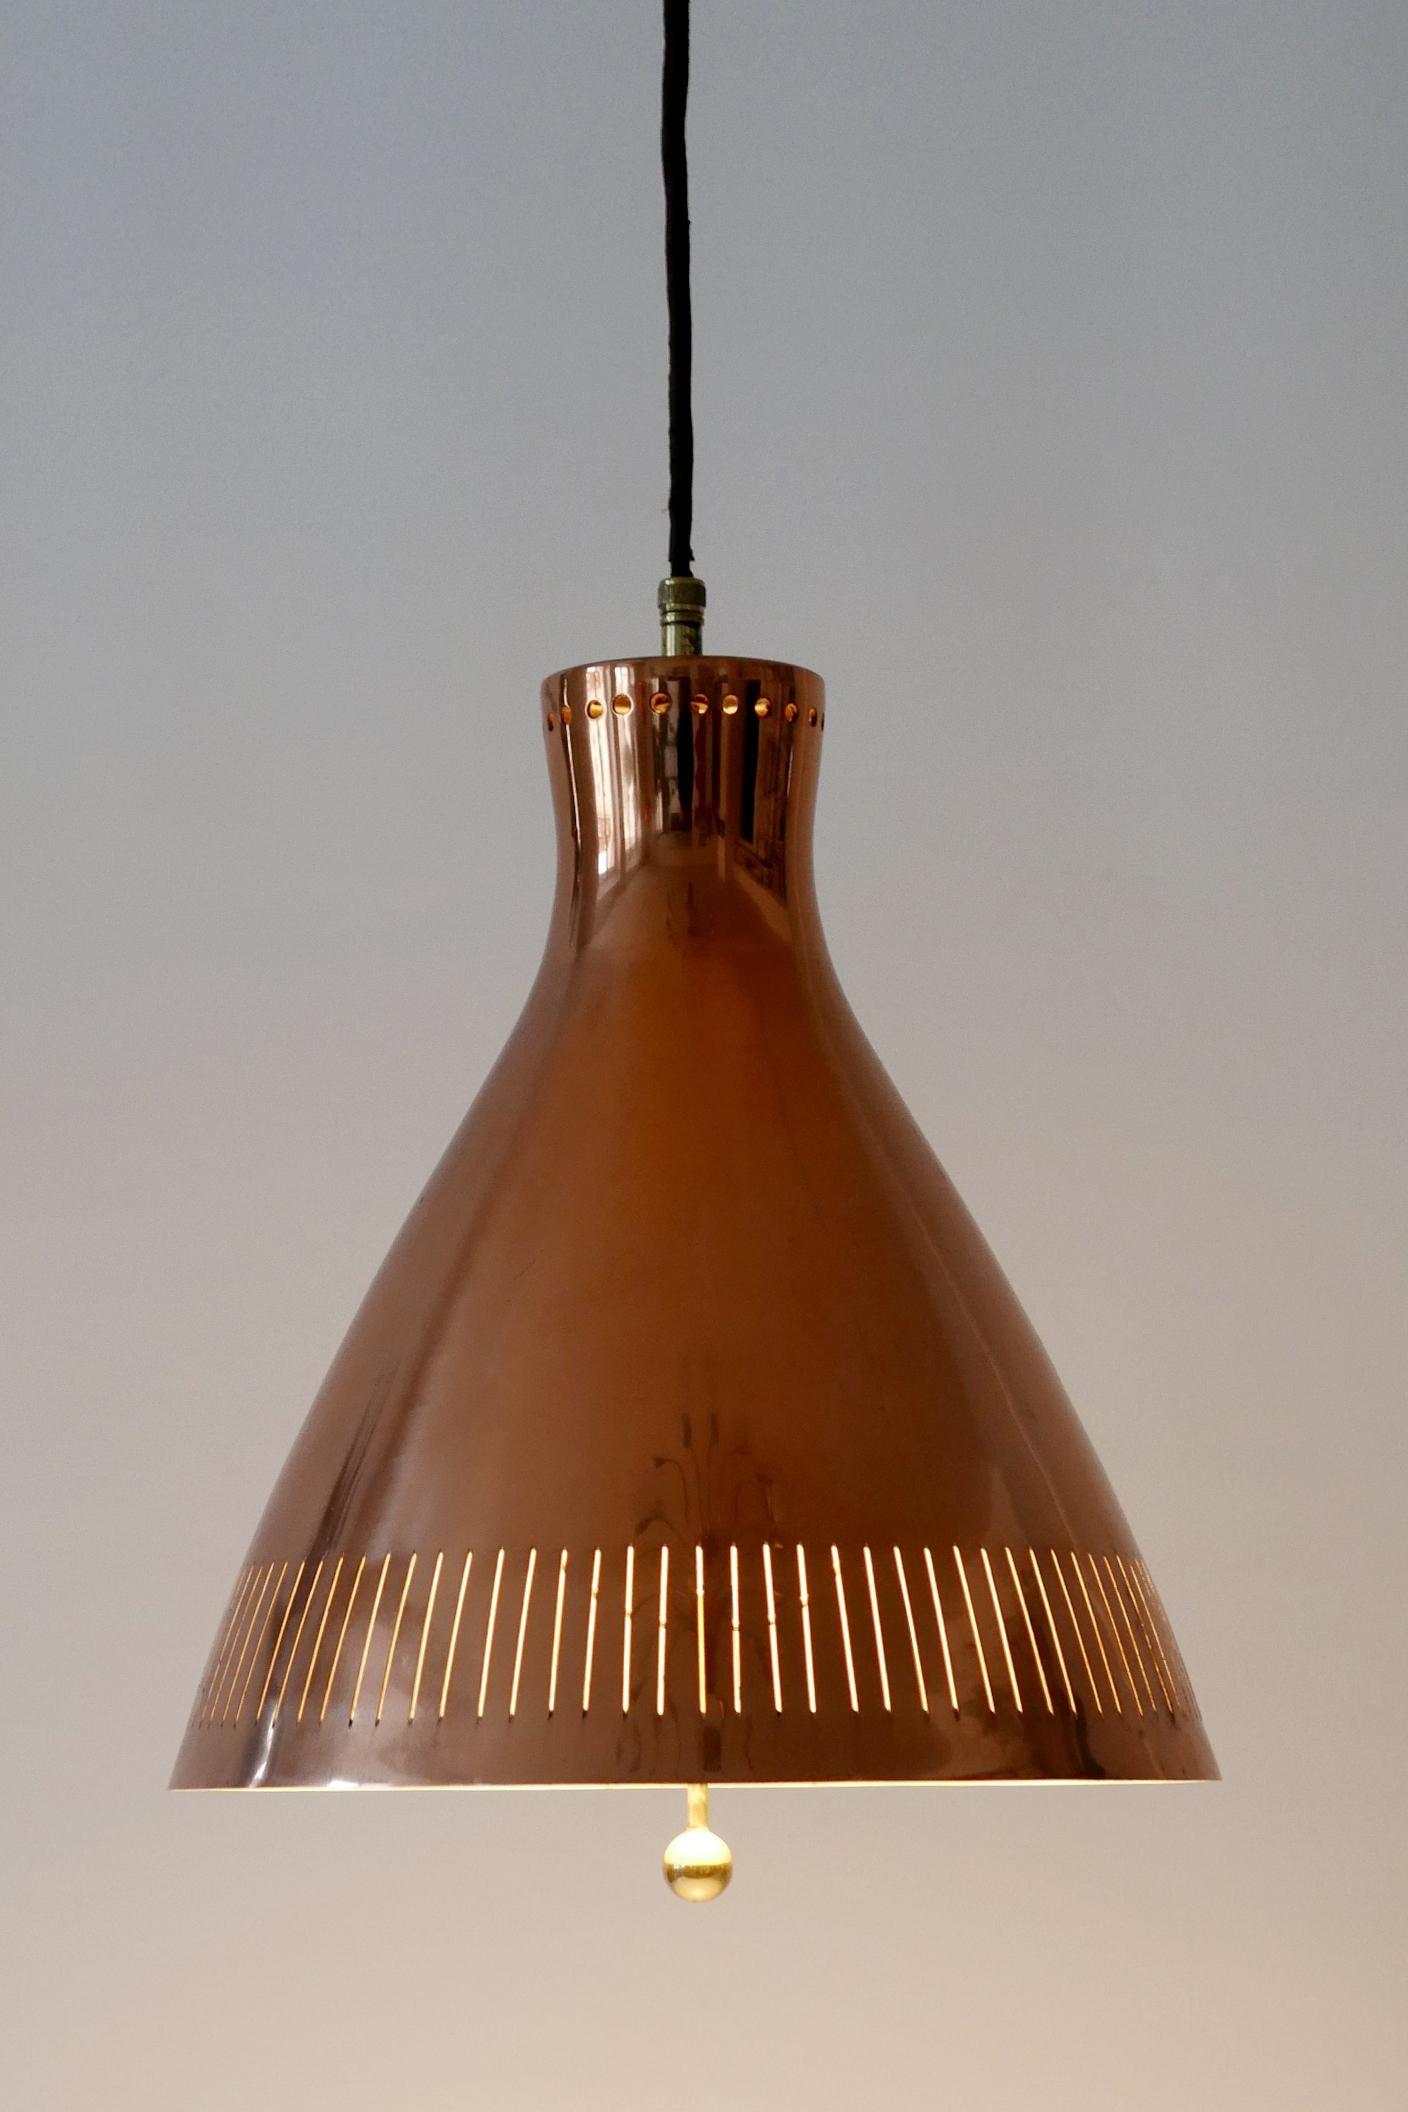 Extremely rare and elegant Mid-Century Modern copper pendant lamp or hanging light. Designed and manufactured by Vereinigte Werkstätten, 1960s, Germany.

Executed in perforated copper sheet, it comes with 1 x E27 Edison screw fit bulb holder, is